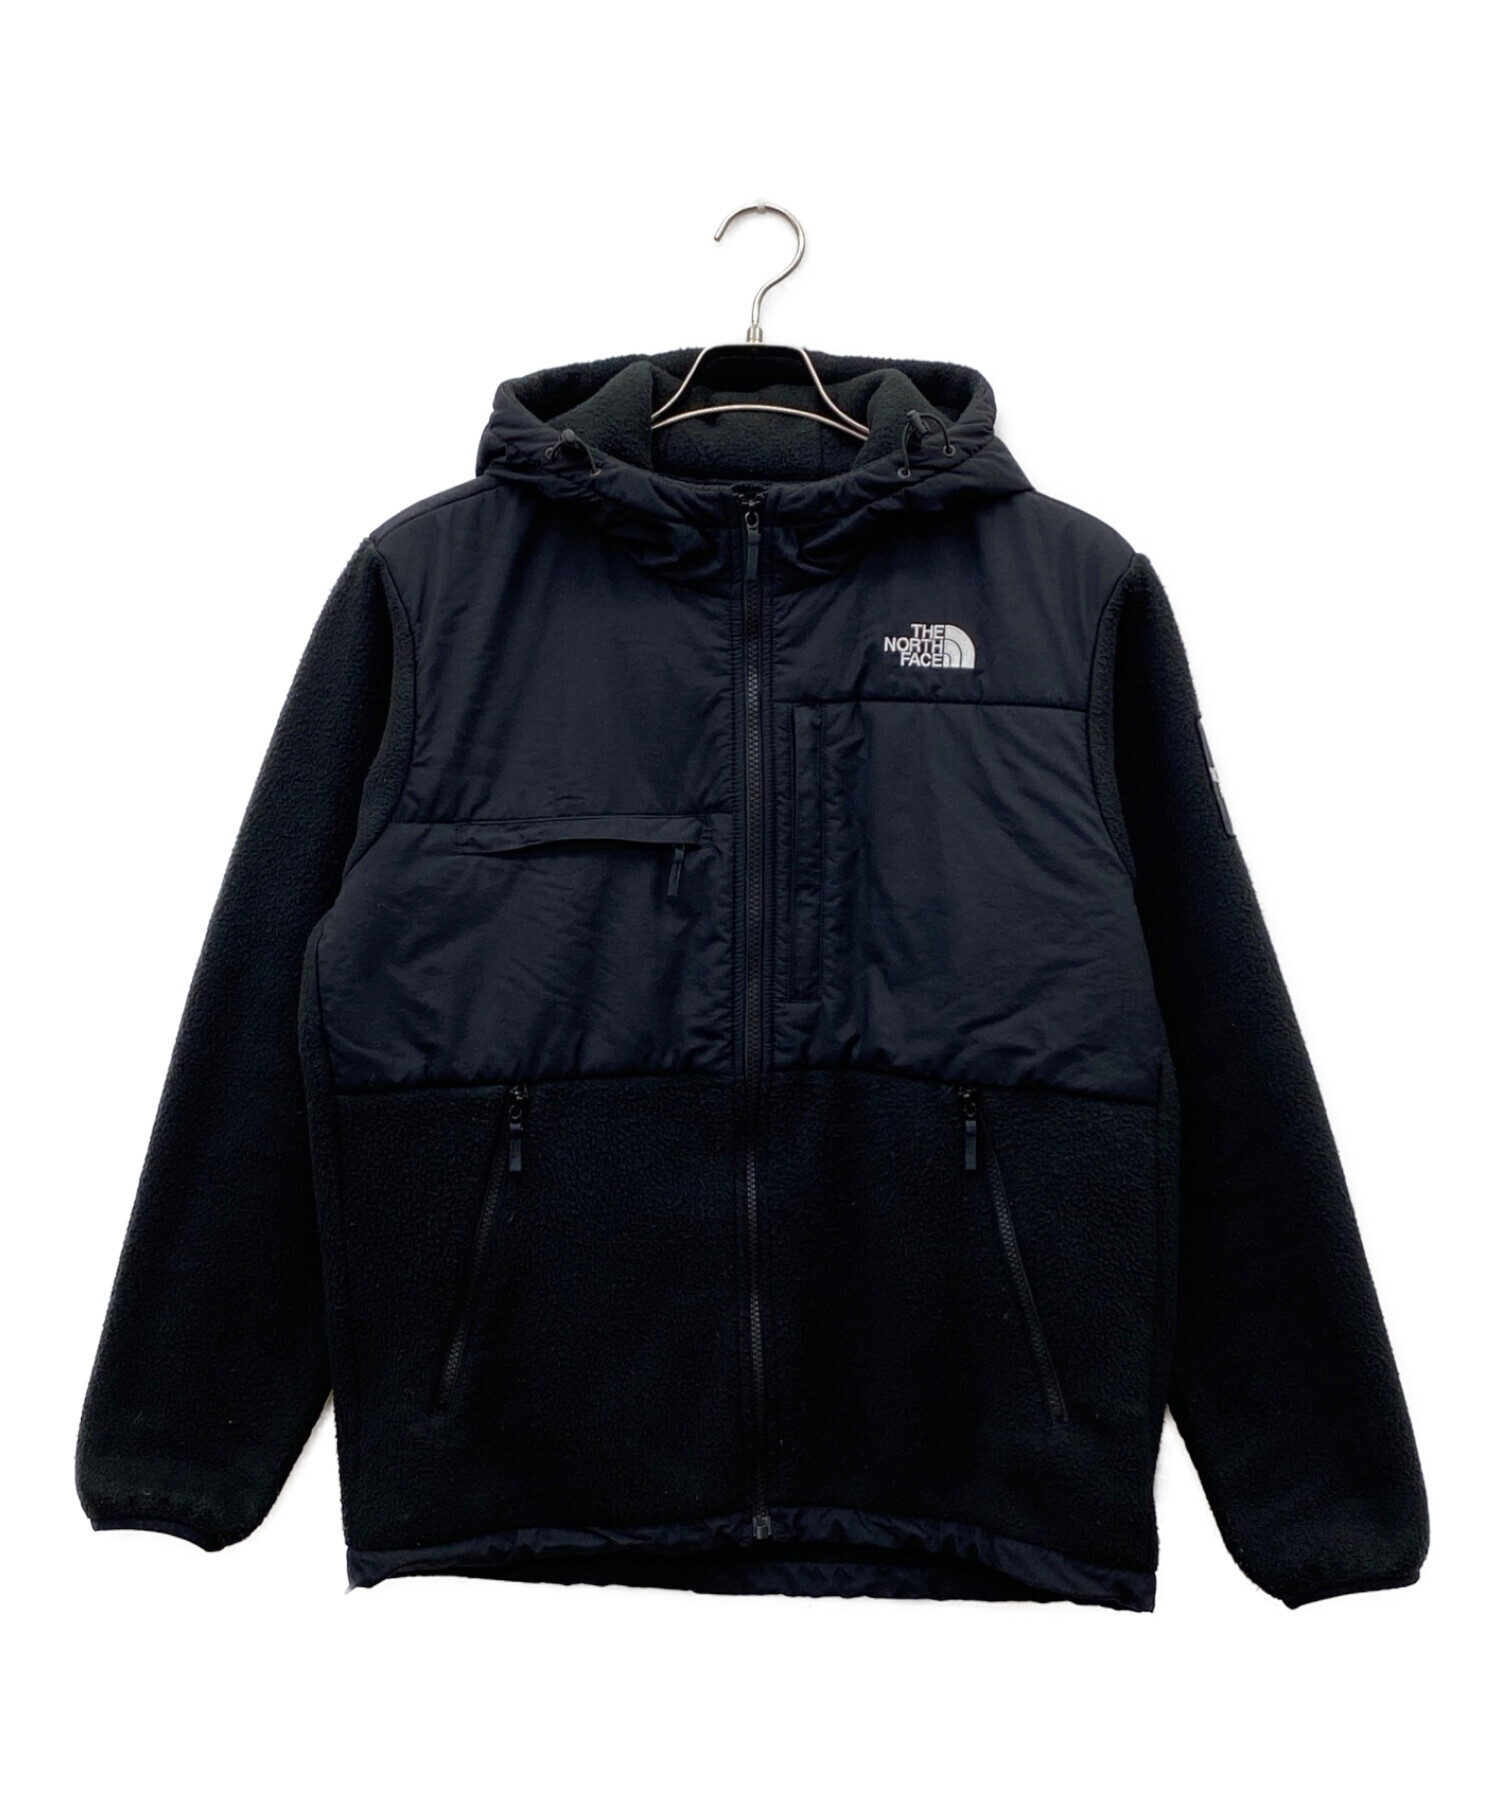 THE NORTH FACE denali foodie jacket